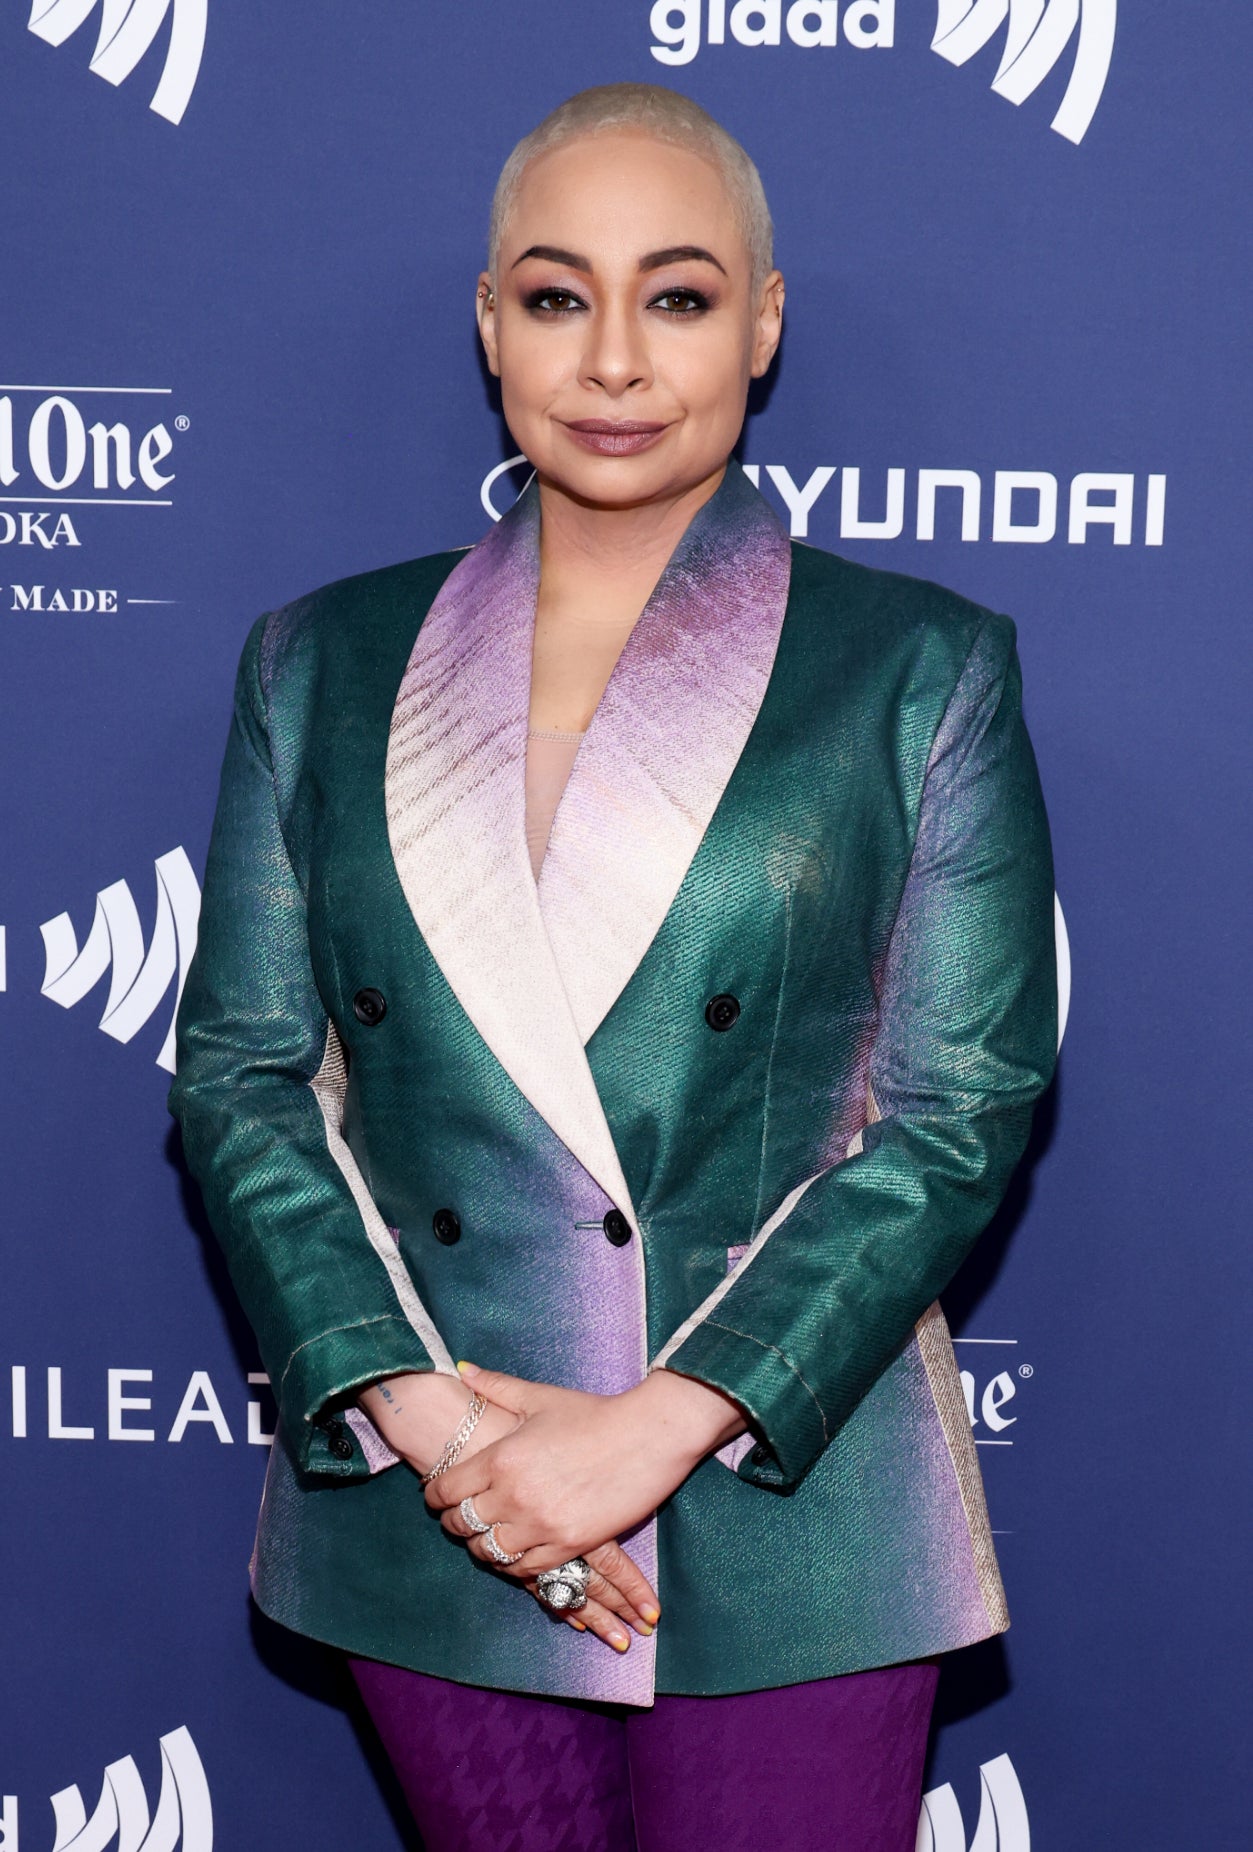 Raven-Symoné posing at an event in a green blazer, purple pants, and matching shoes